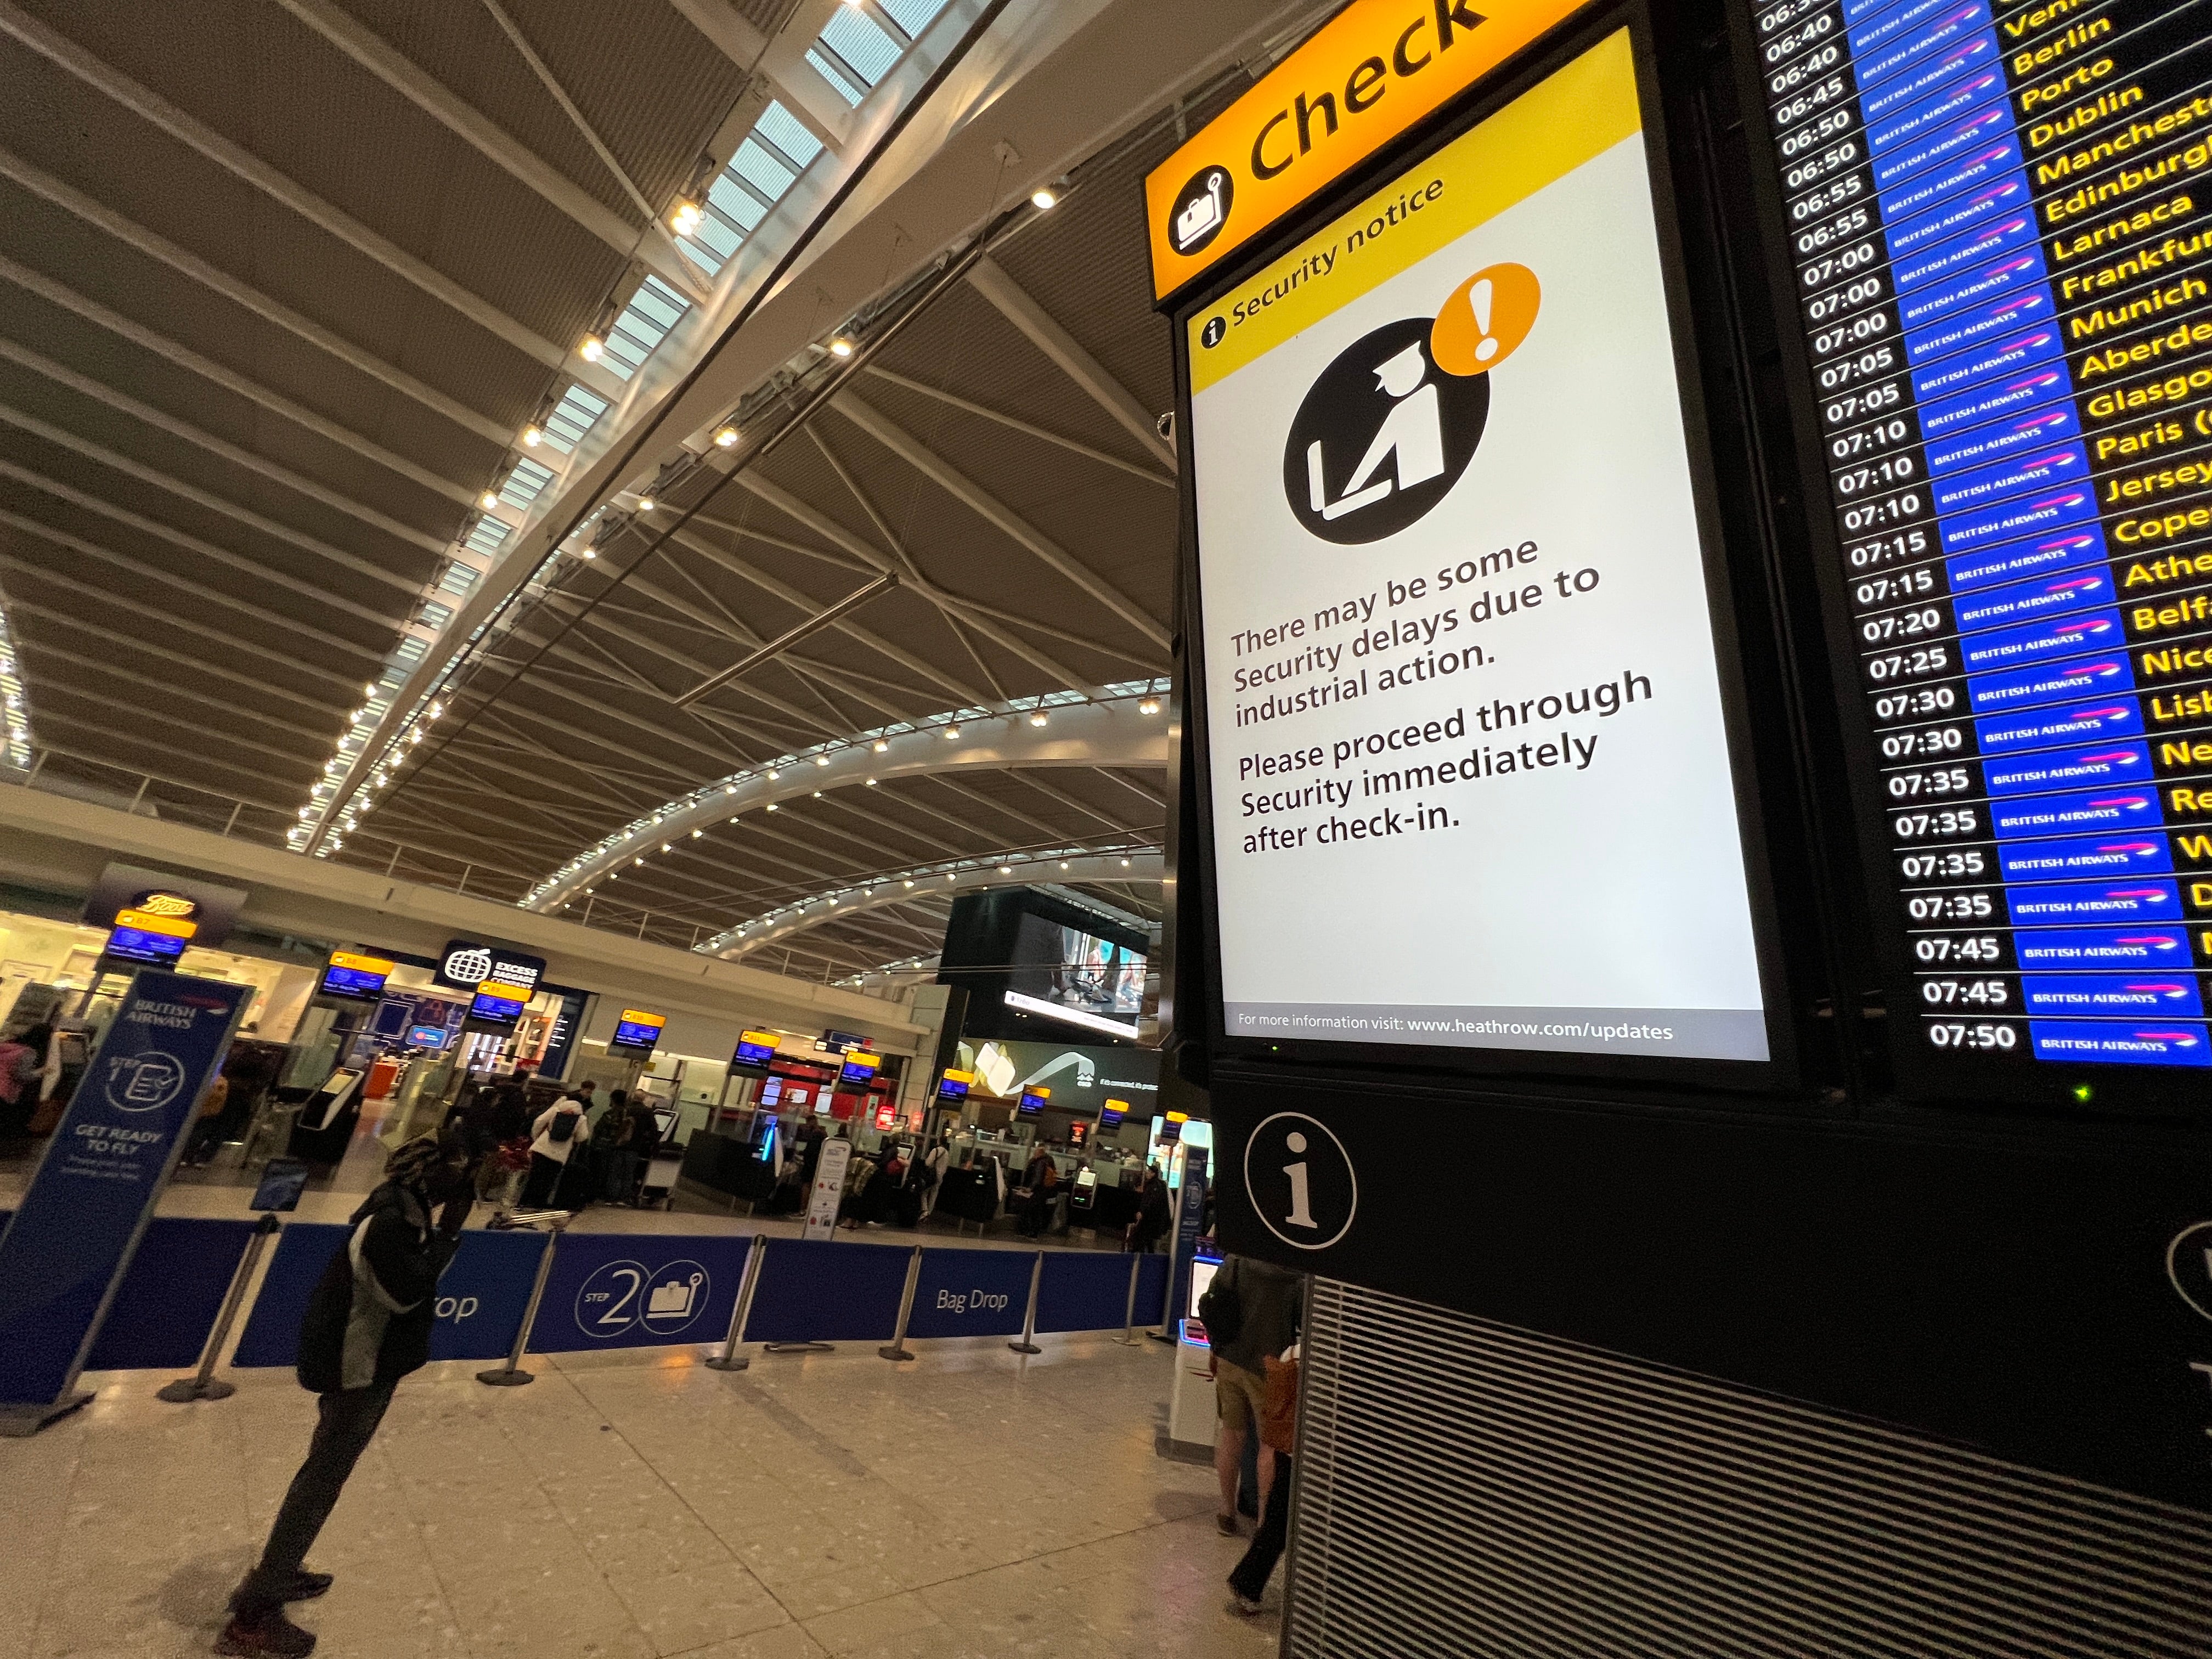 Go slow? Signs at Heathrow airport Terminal 5 warn of possible delays at security